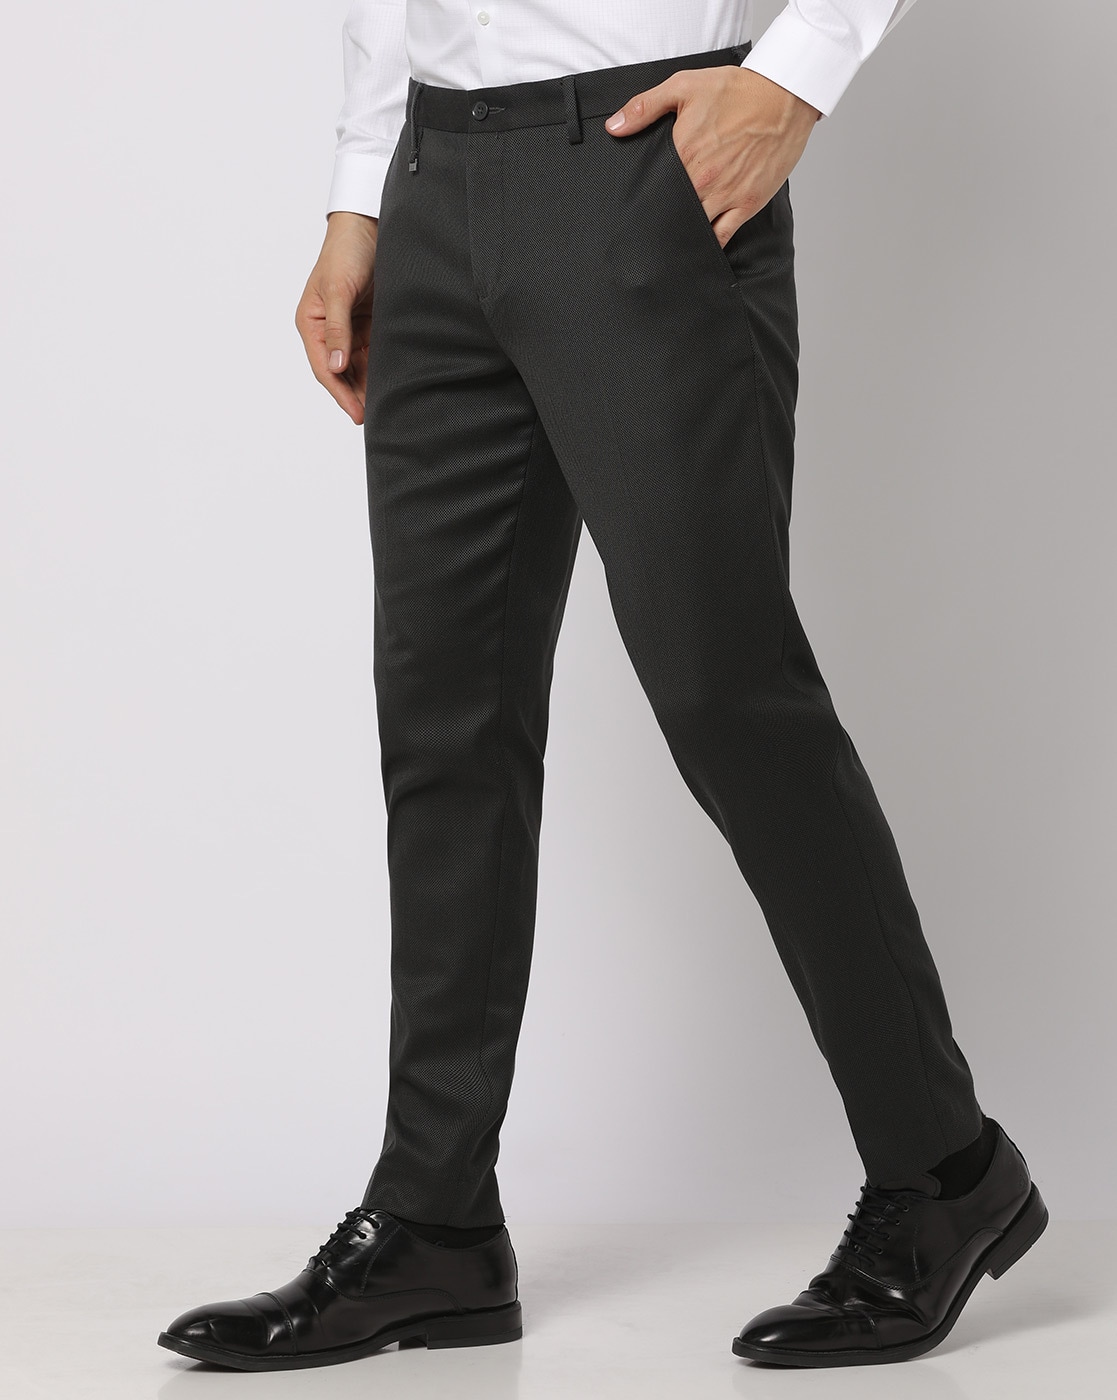 Buy Charcoal Grey Trousers  Pants for Men by MCHENRY Online  Ajiocom